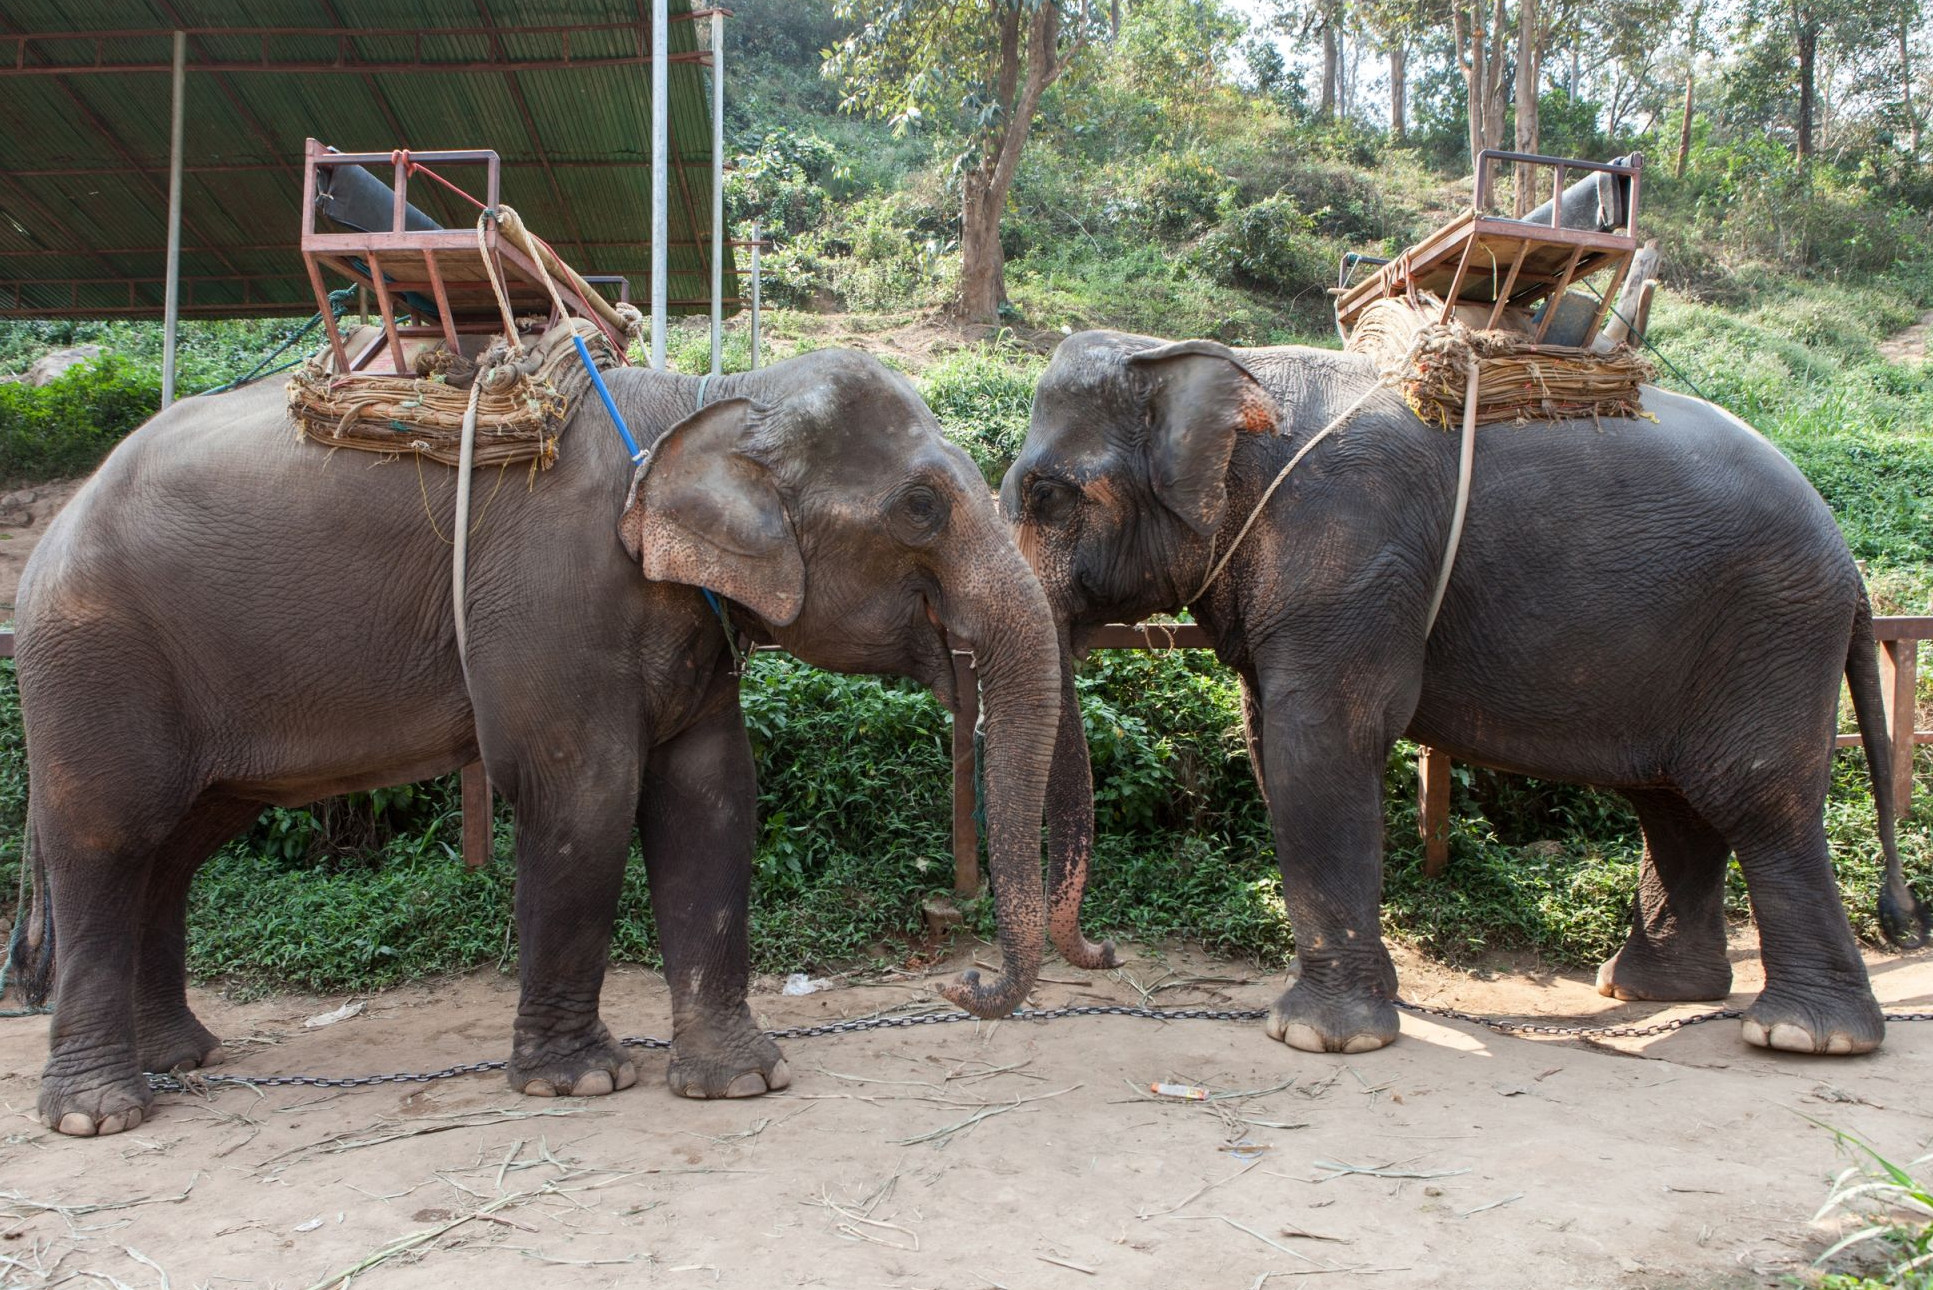 Elephants at tourist attraction with saddles on their backs - Wildlife. Not entertainers - World Animal Protection